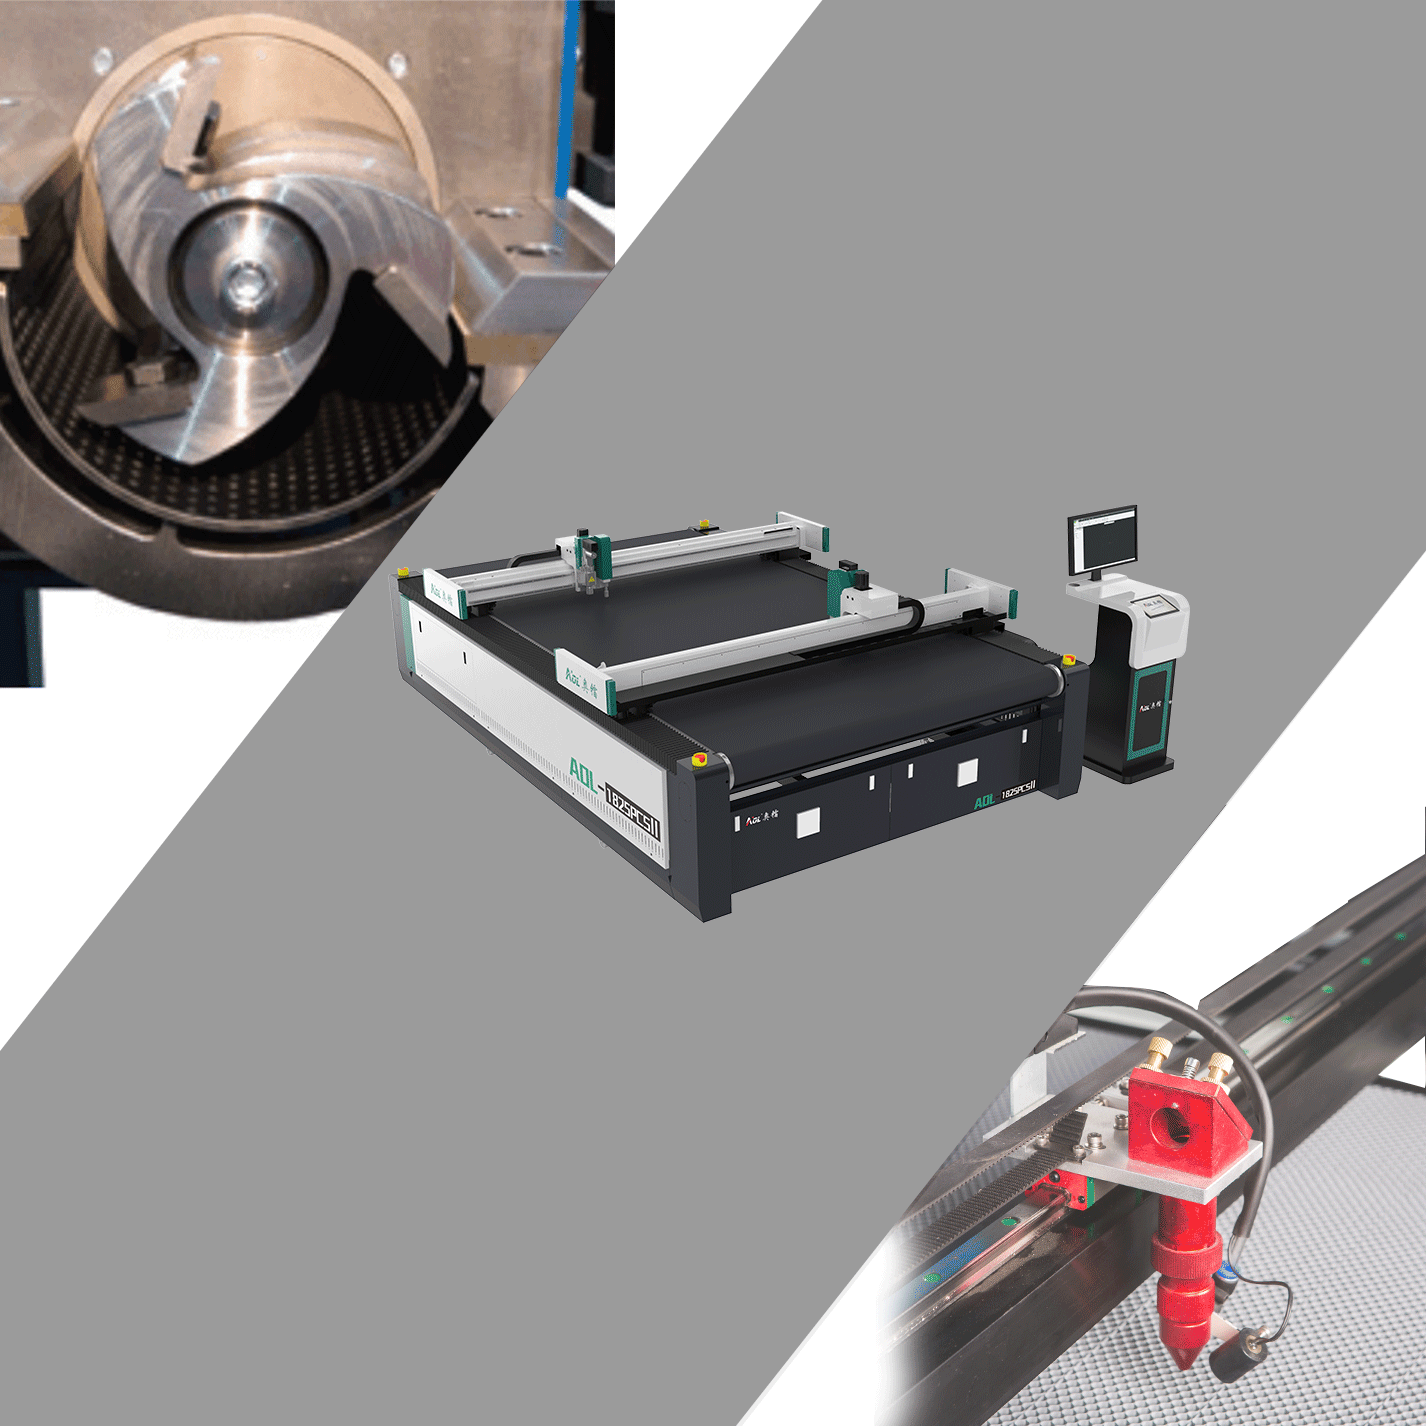 Why choose vibration knife cutting instead of laser machine or rotary knife?